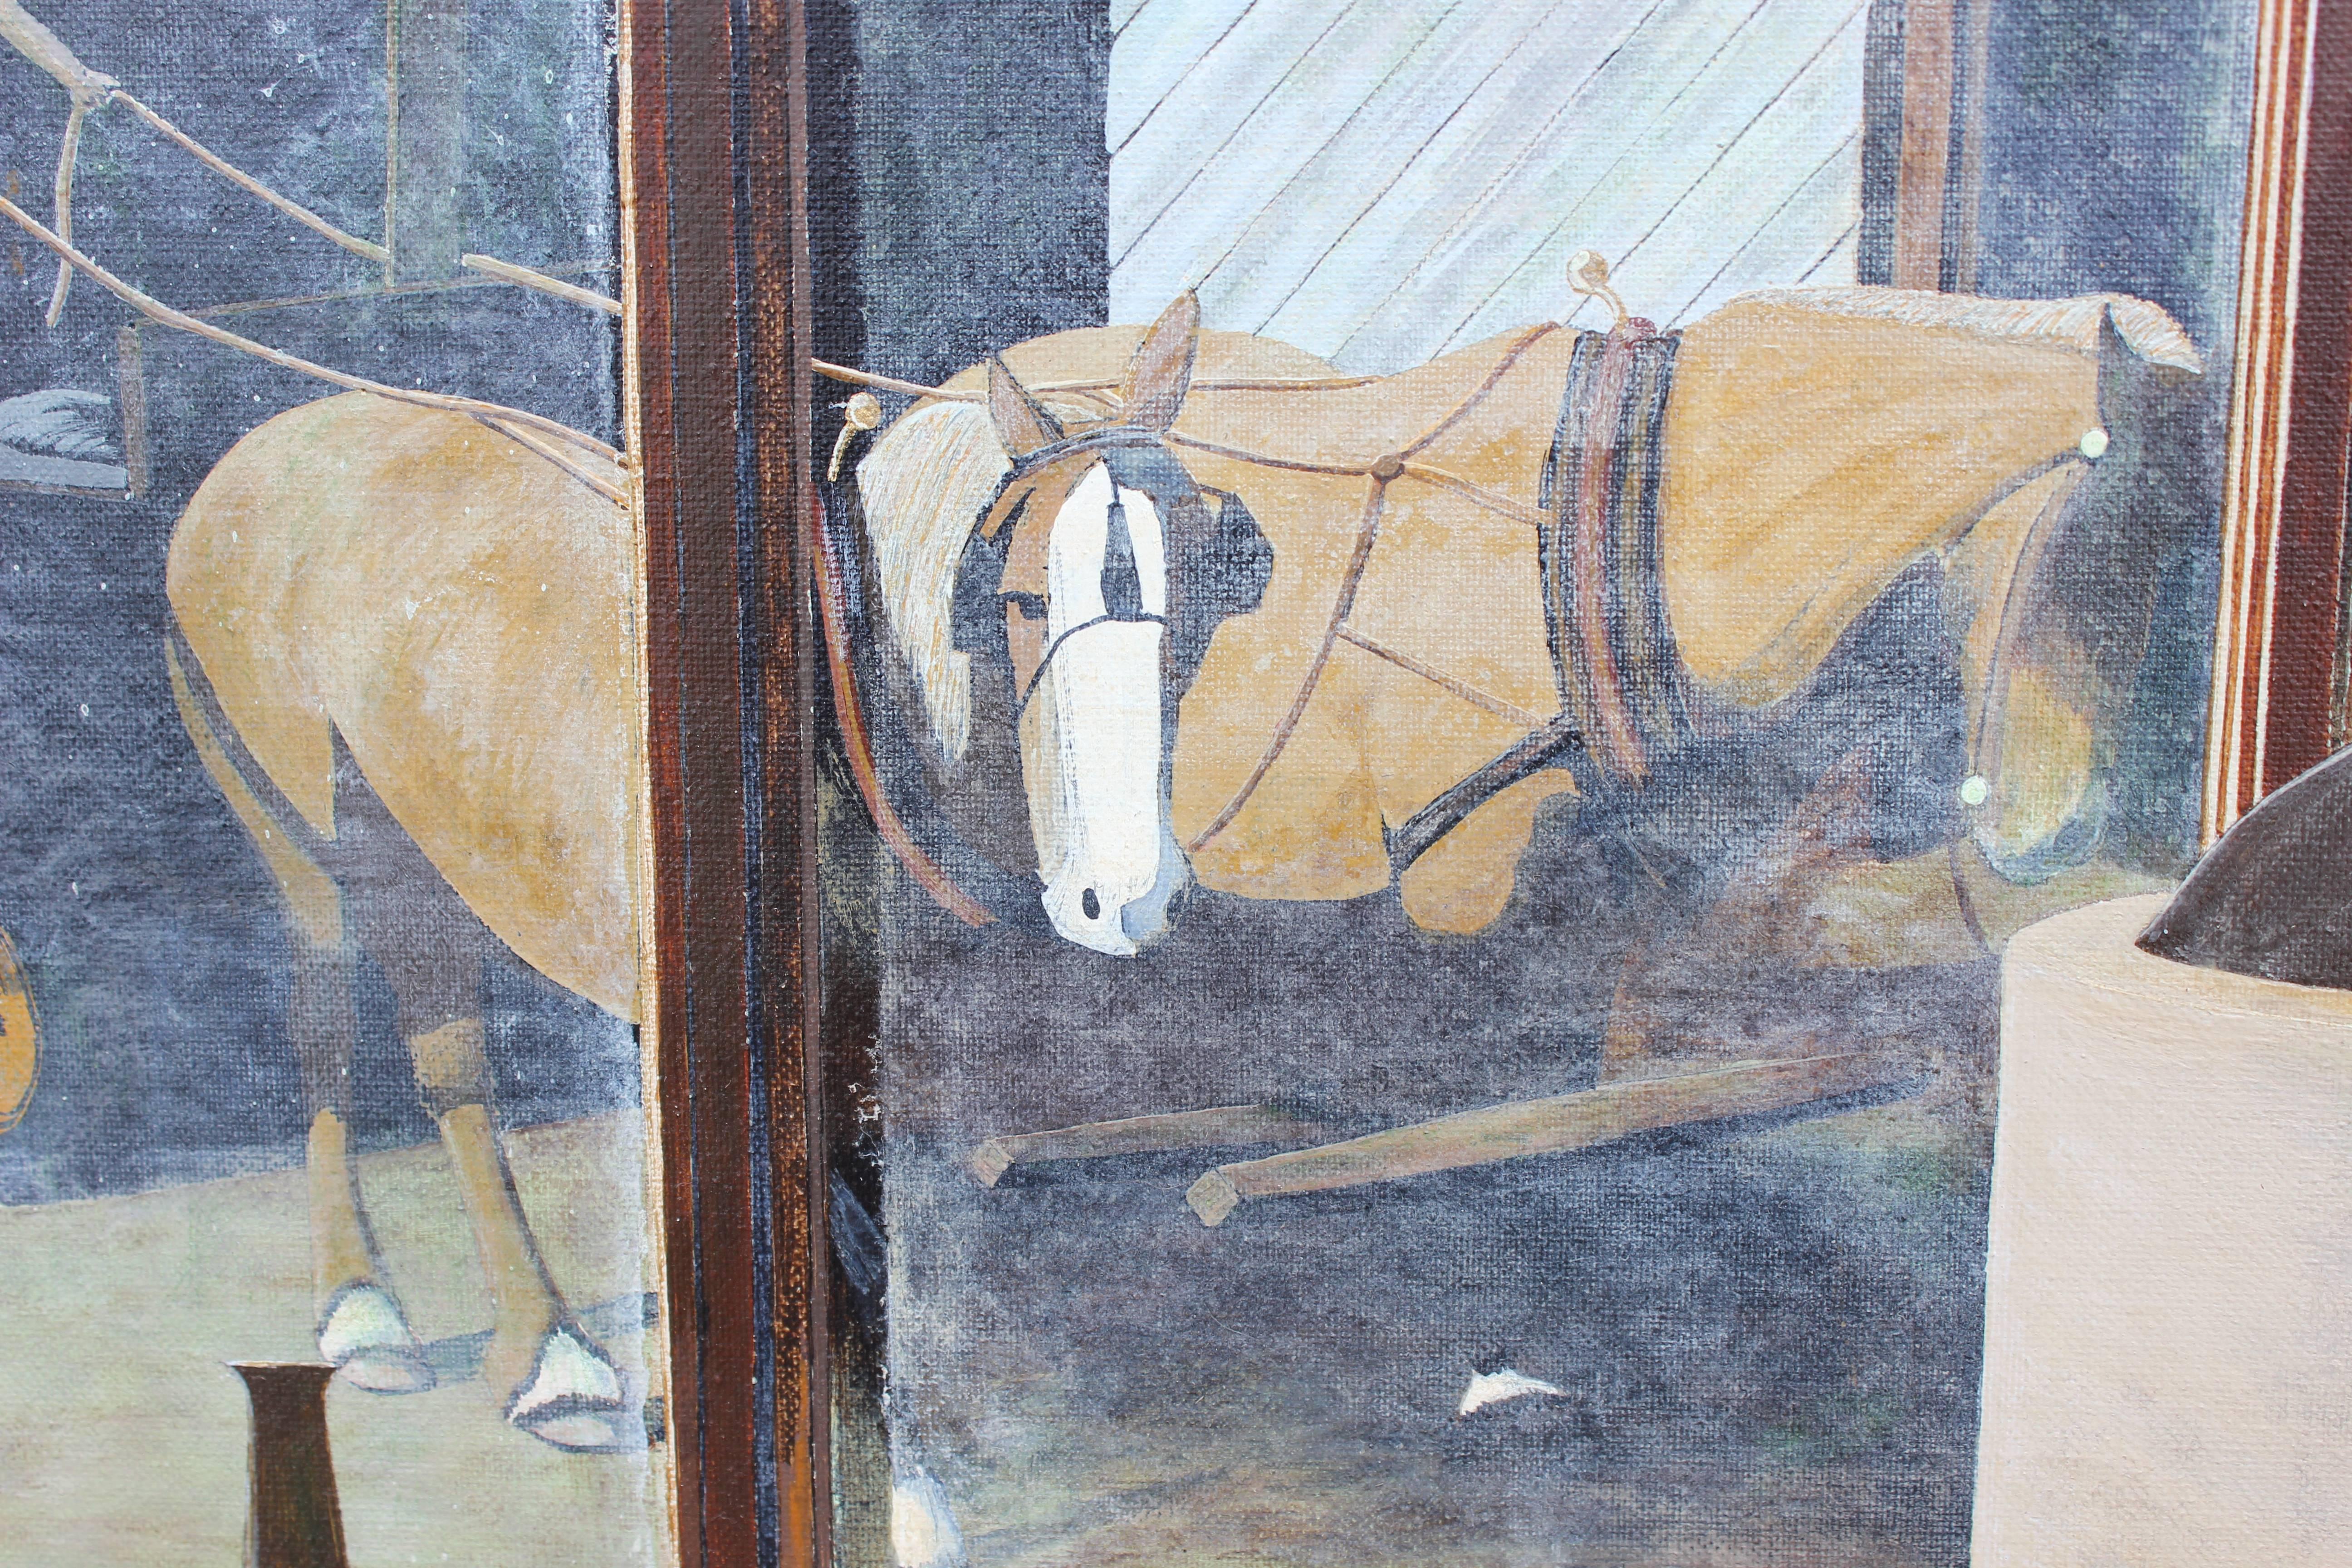 Still Life Painting of a Country Window Cill and Horses - Gray Animal Painting by Marvin Smith